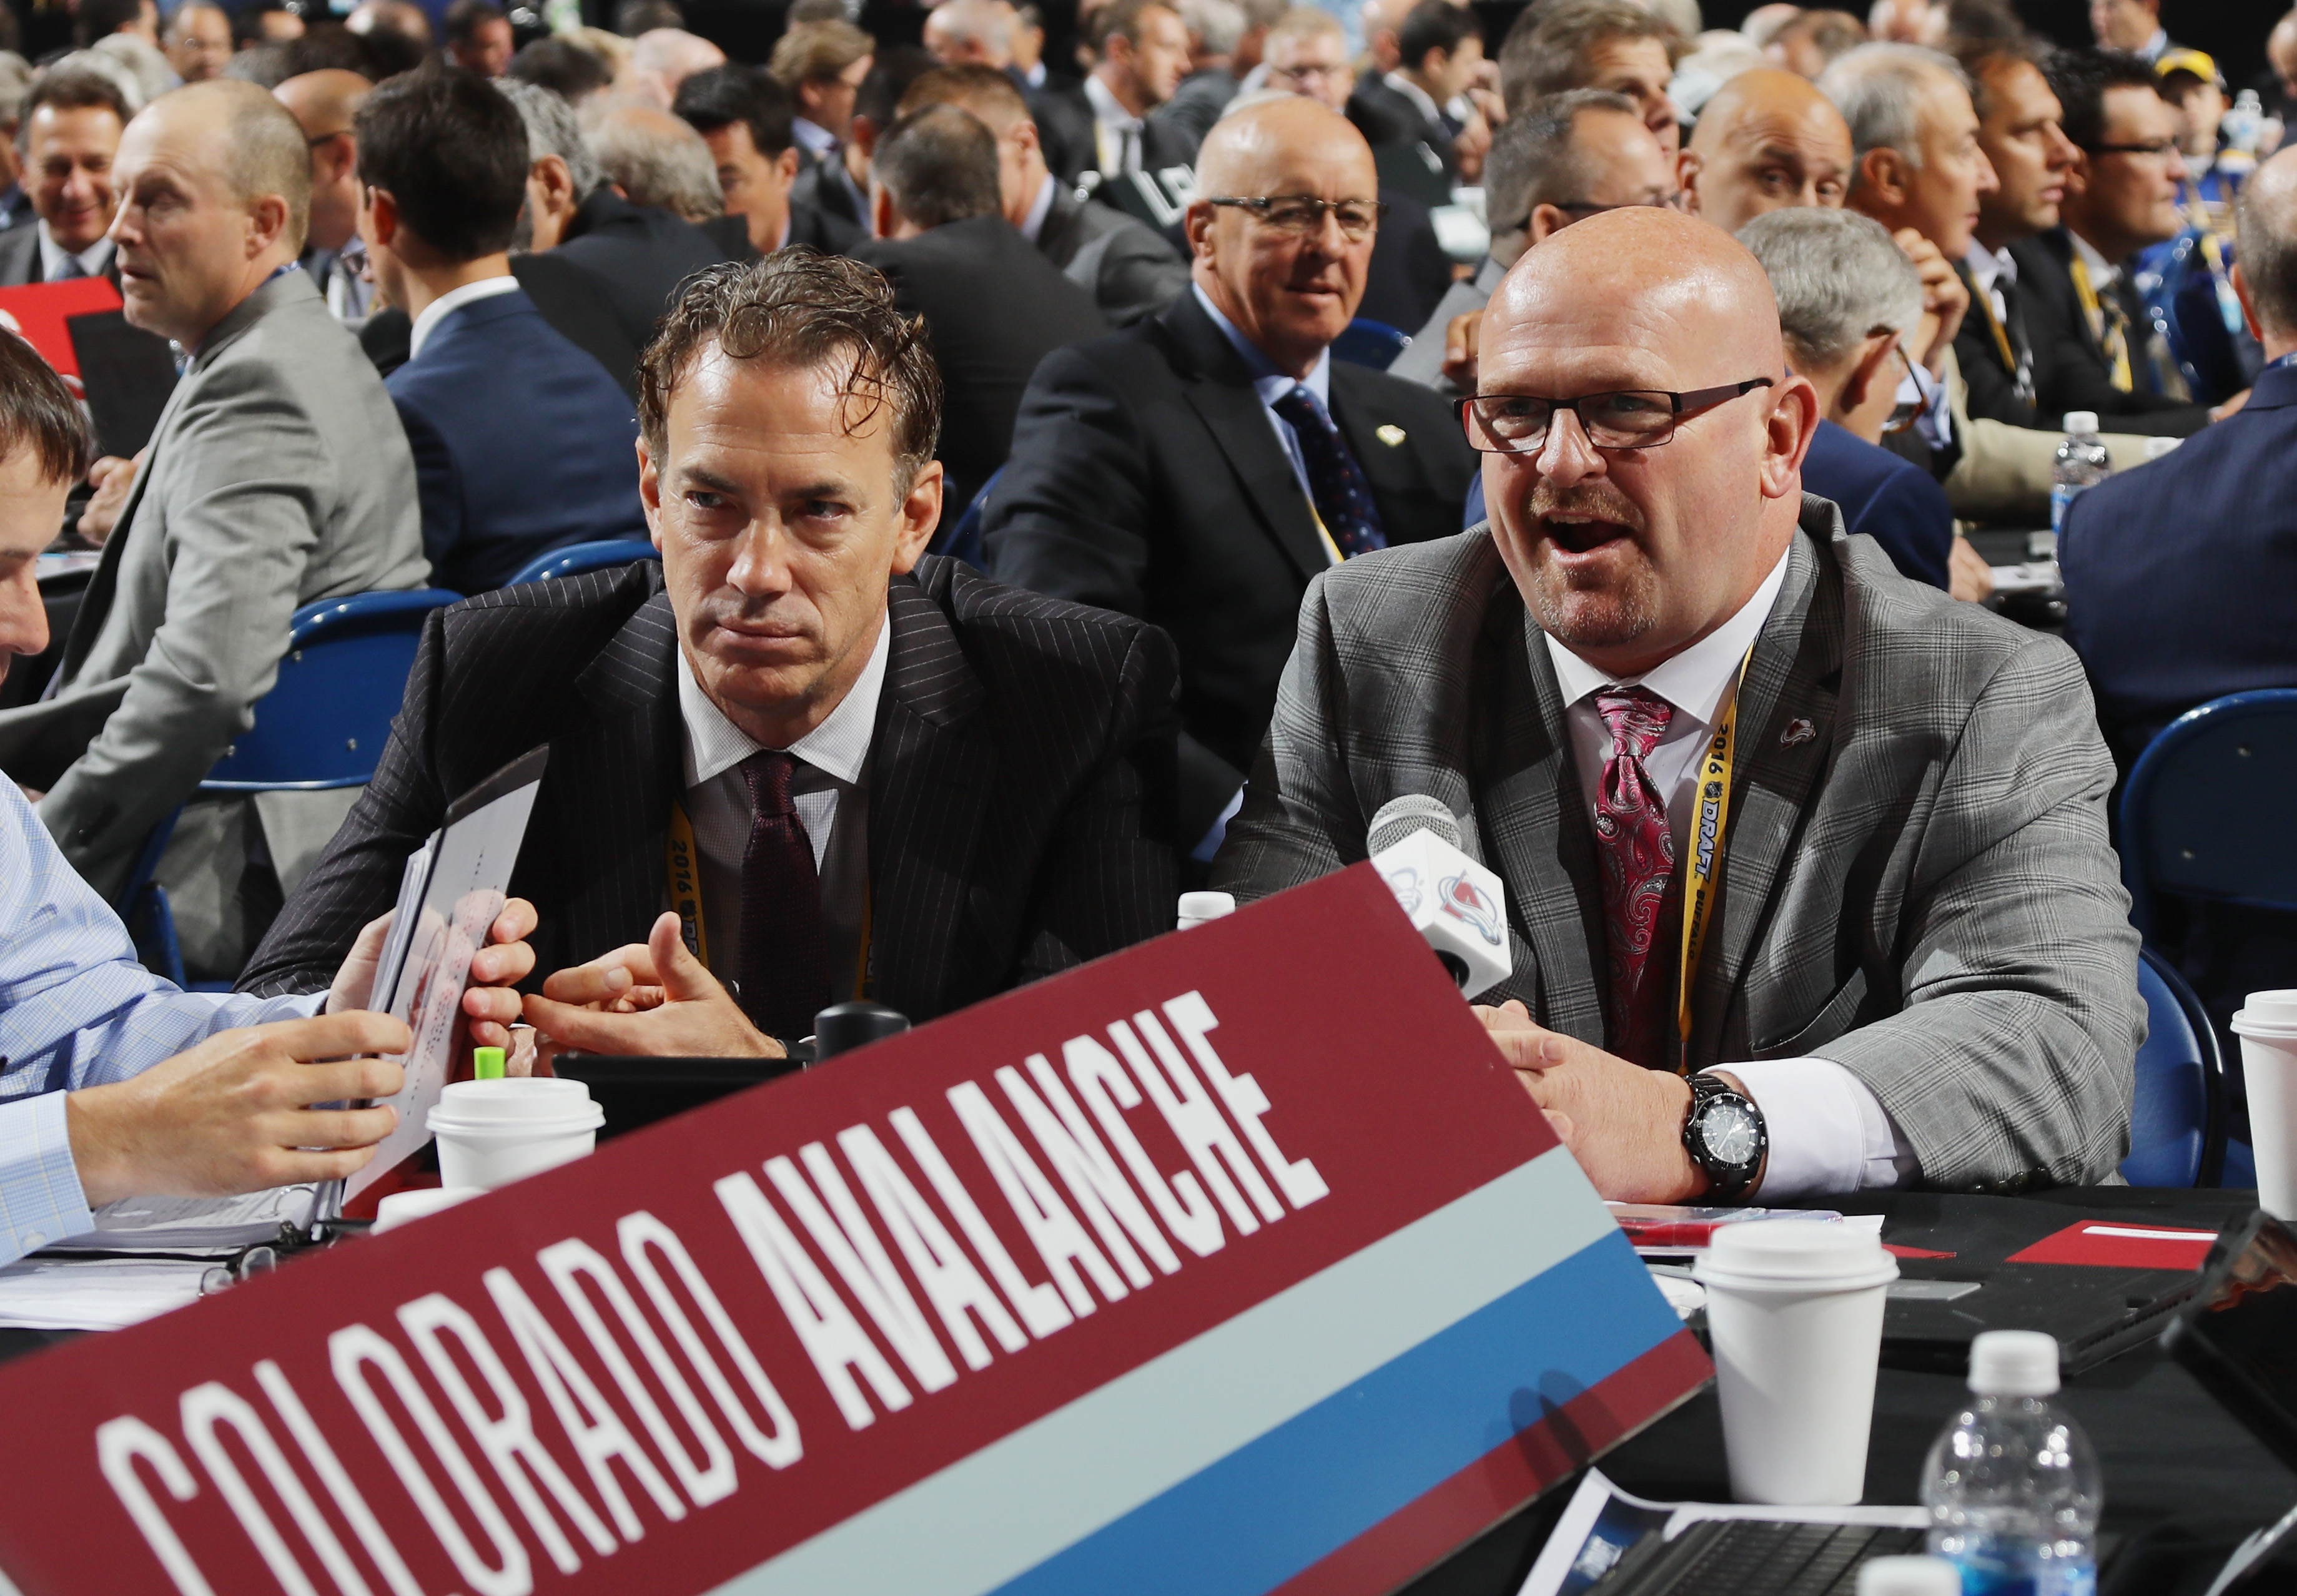 NHL draft 2016: What to expect from the Colorado Avalanche